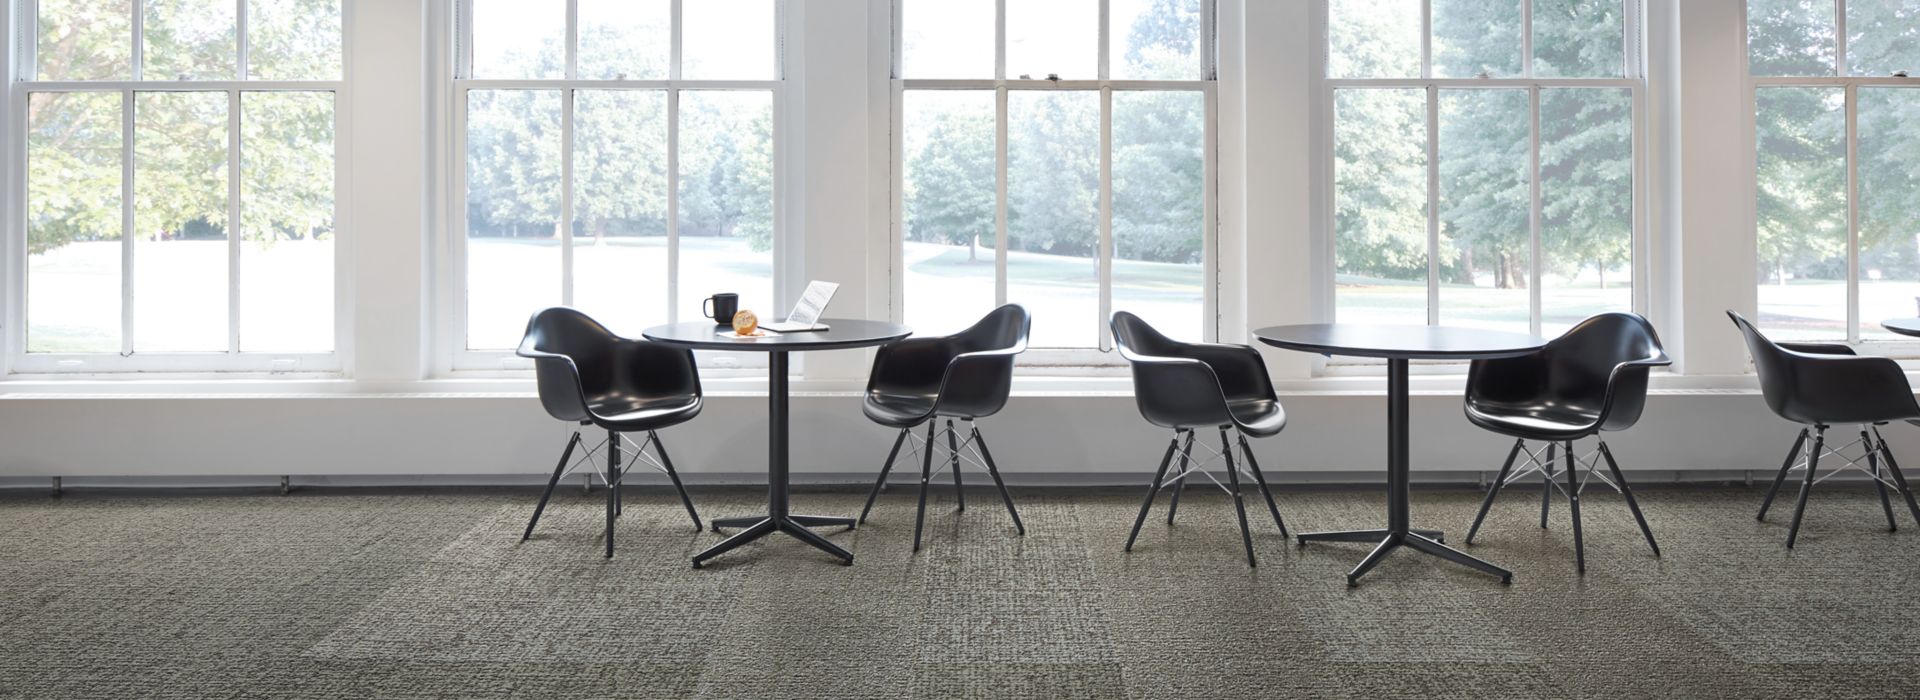 Interface Gridlock carpet tile with small tables against a wall of windows